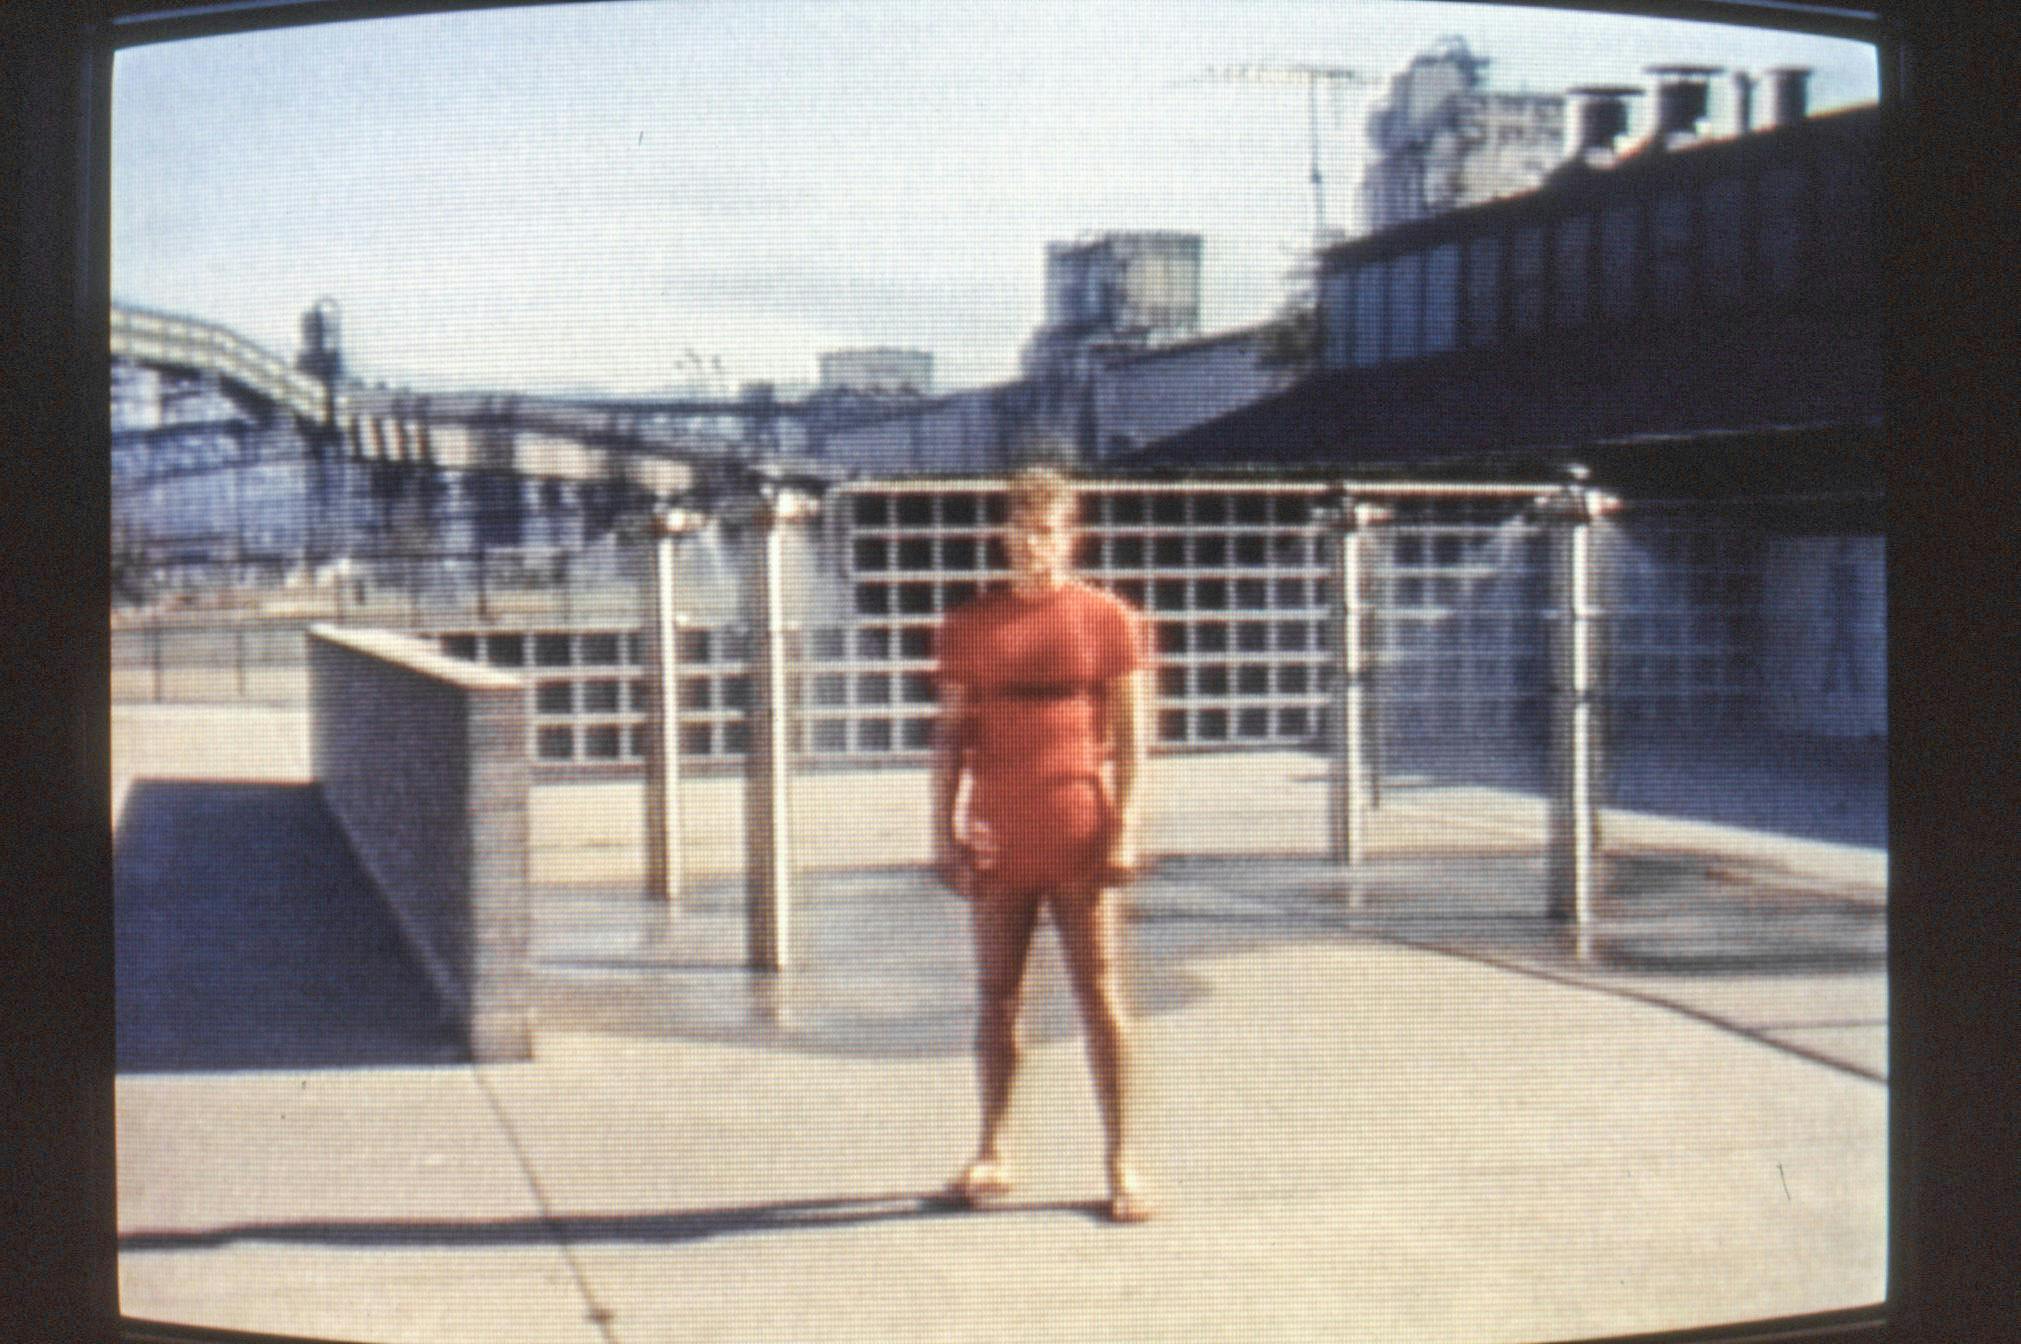 A closeup of a film playing on a small, curved screen. The image shows a person in a red t-shirt and shorts at a spray station in a public park. The image on the screen is grainy from the analog film.